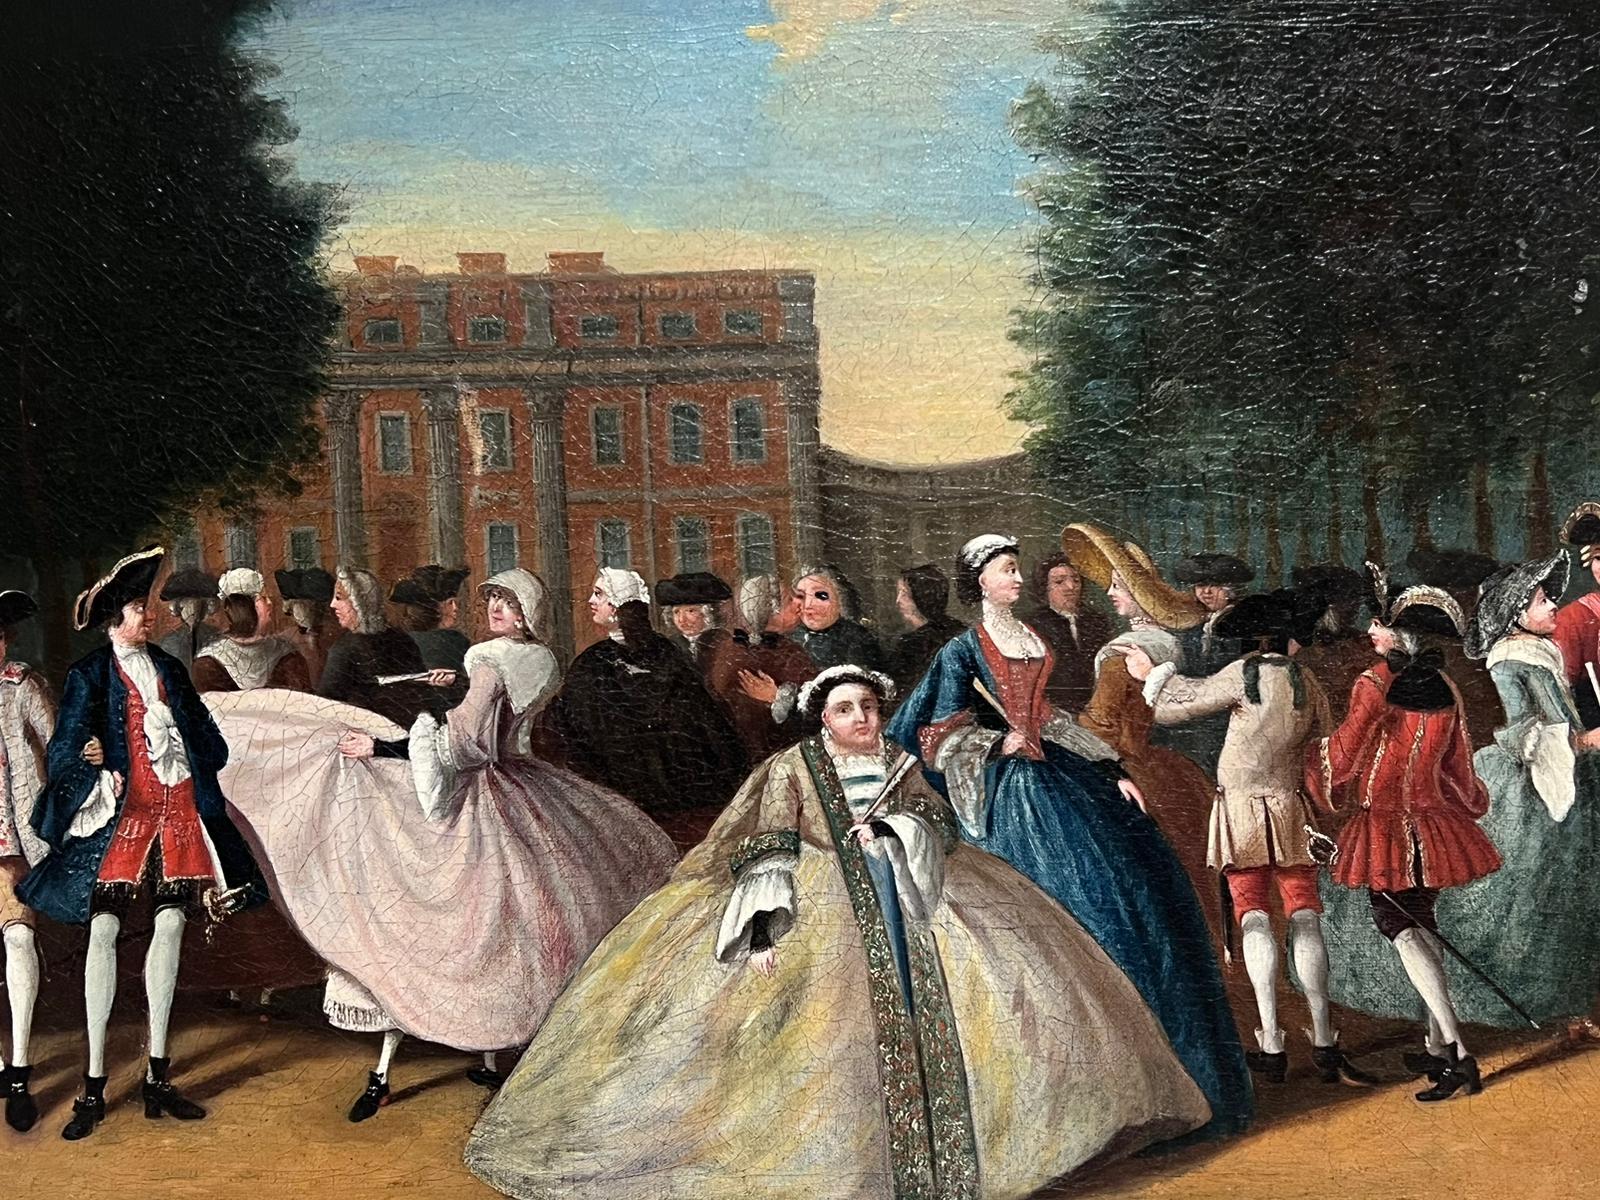 Figures outside a Stately Home
English School, circle of William Hogarth (British 1697-1764)
oil painting on canvas, framed
framed: 24 x 30 inches
canvas: 19 x 25 inches
provenance: private collection, England
condition: very good and sound